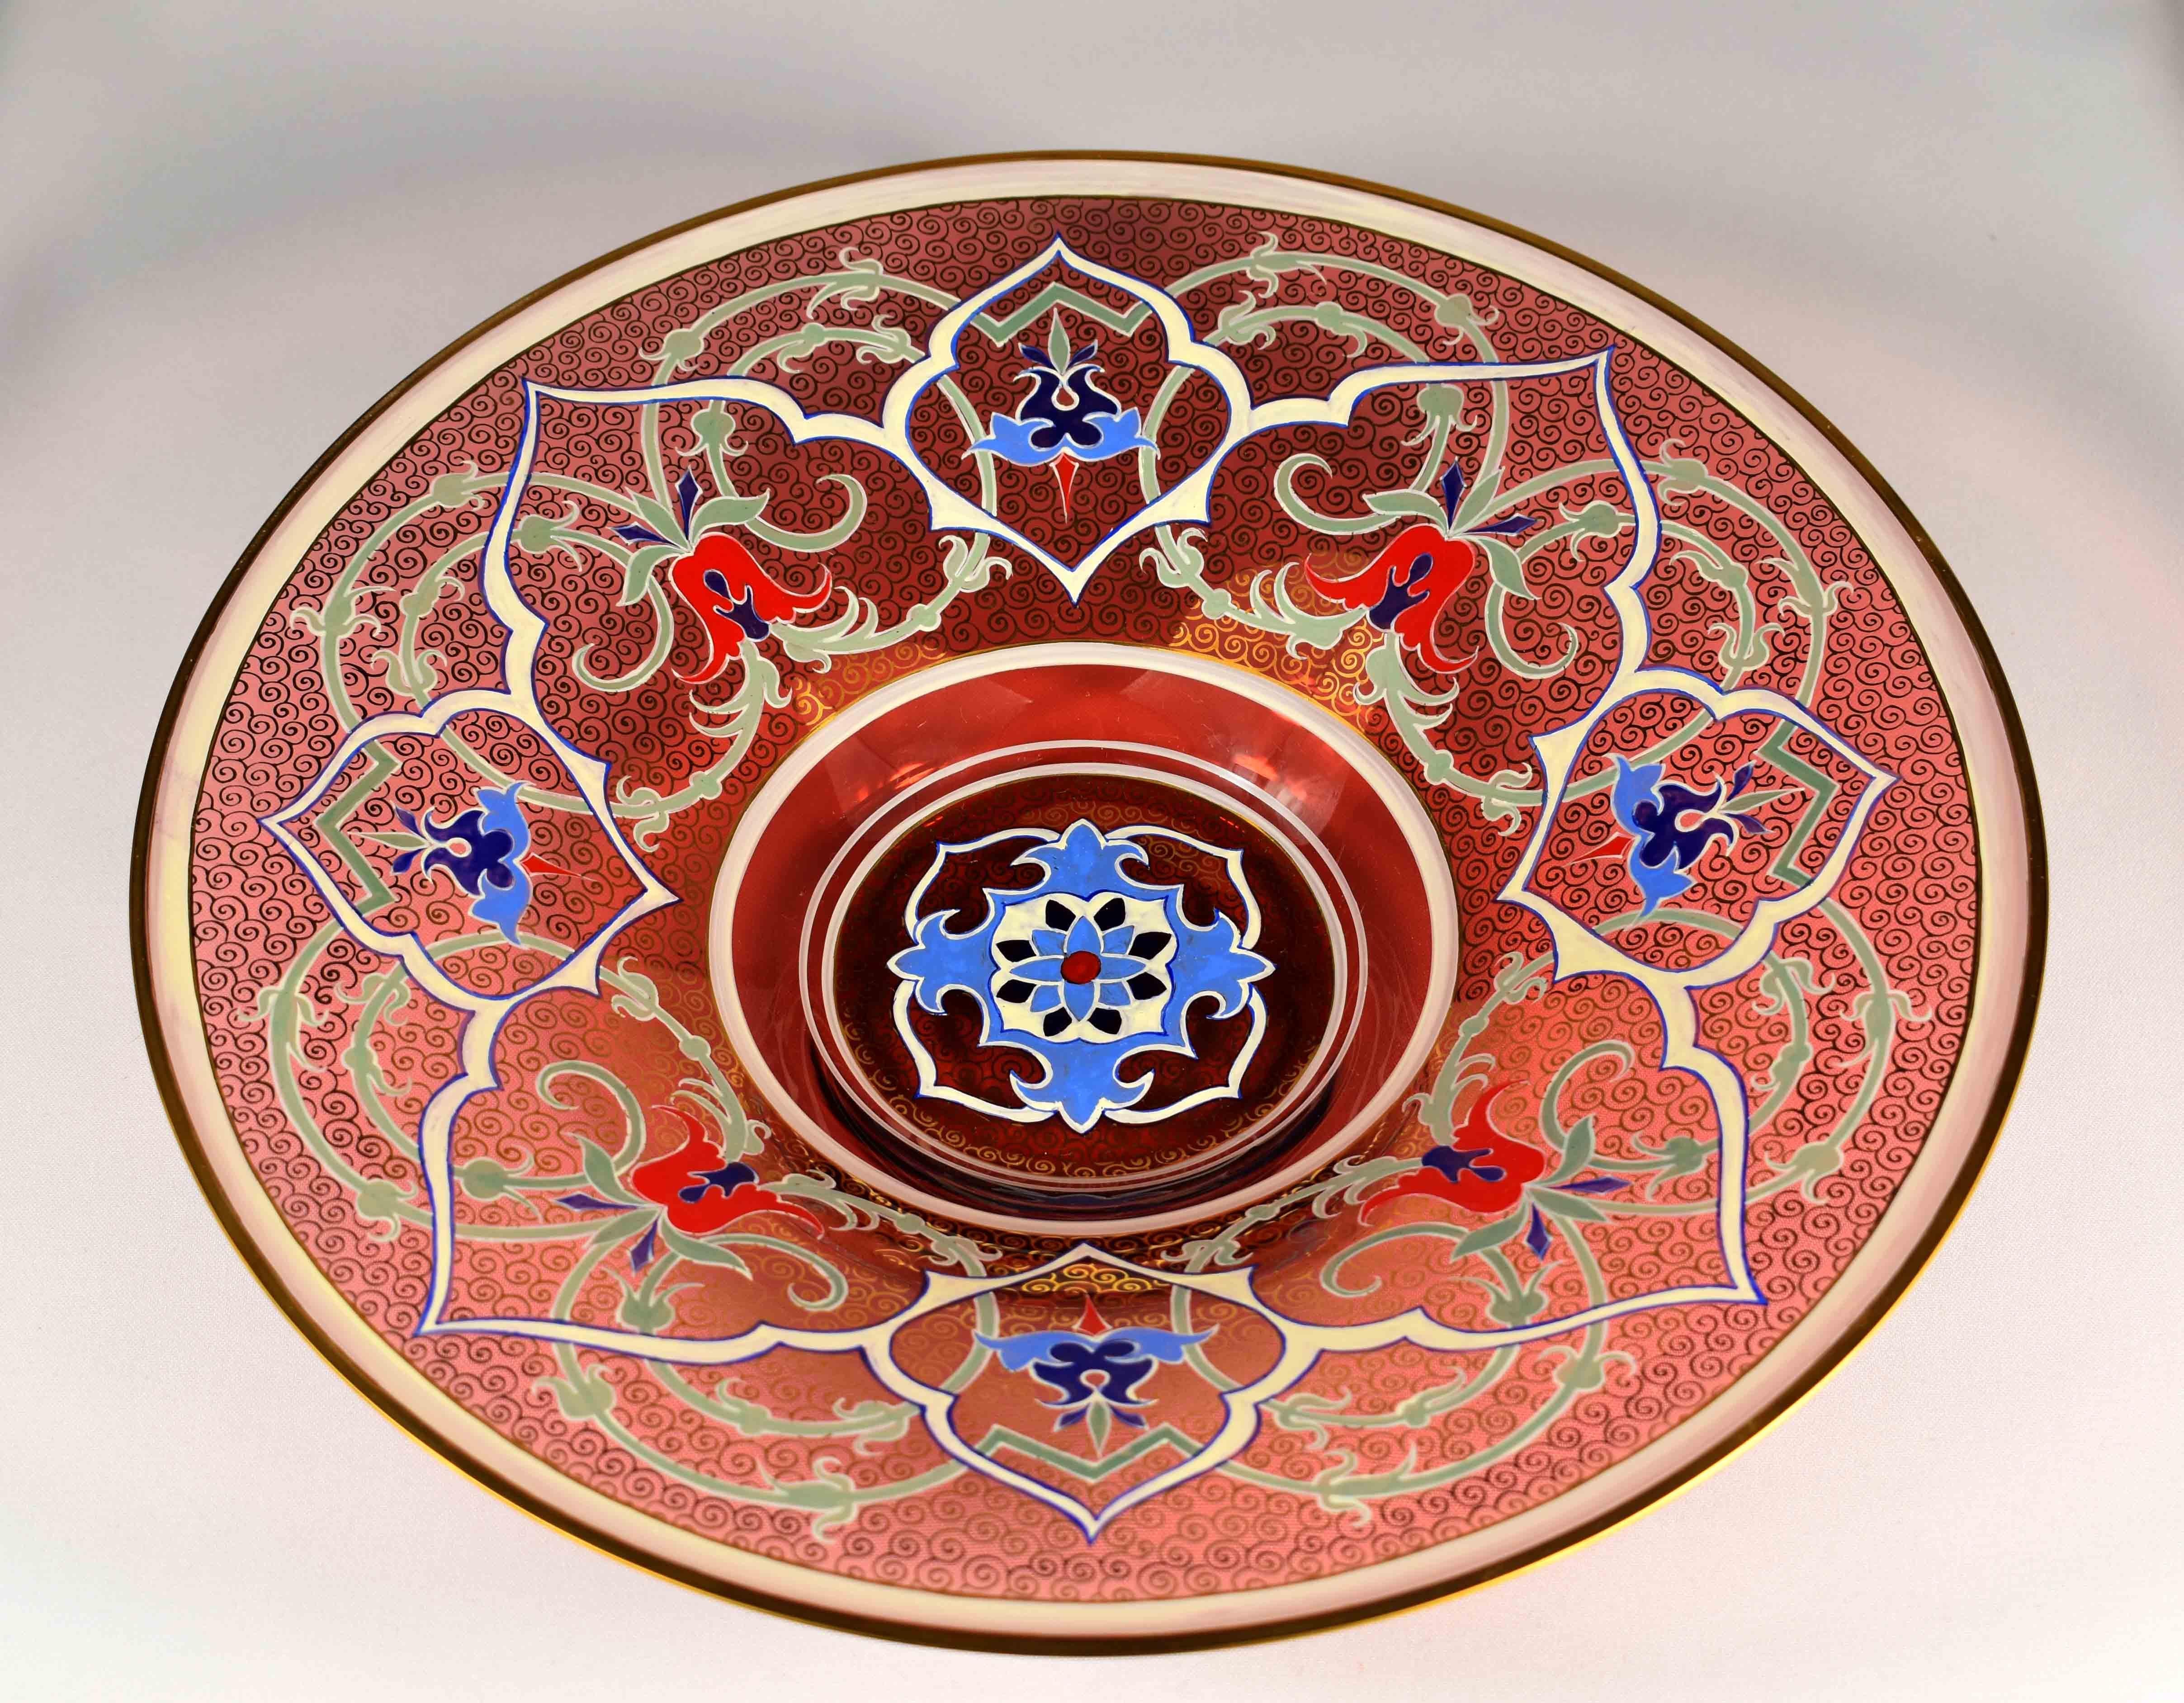 Hand blown ruby and clear glass plate, made by Czech glassmakers in the 20th century for the Persian or Ottoman market, beautiful ruby red design with impressive enameling and gilding, gilt enamel rim, circular body finely painted all around rich